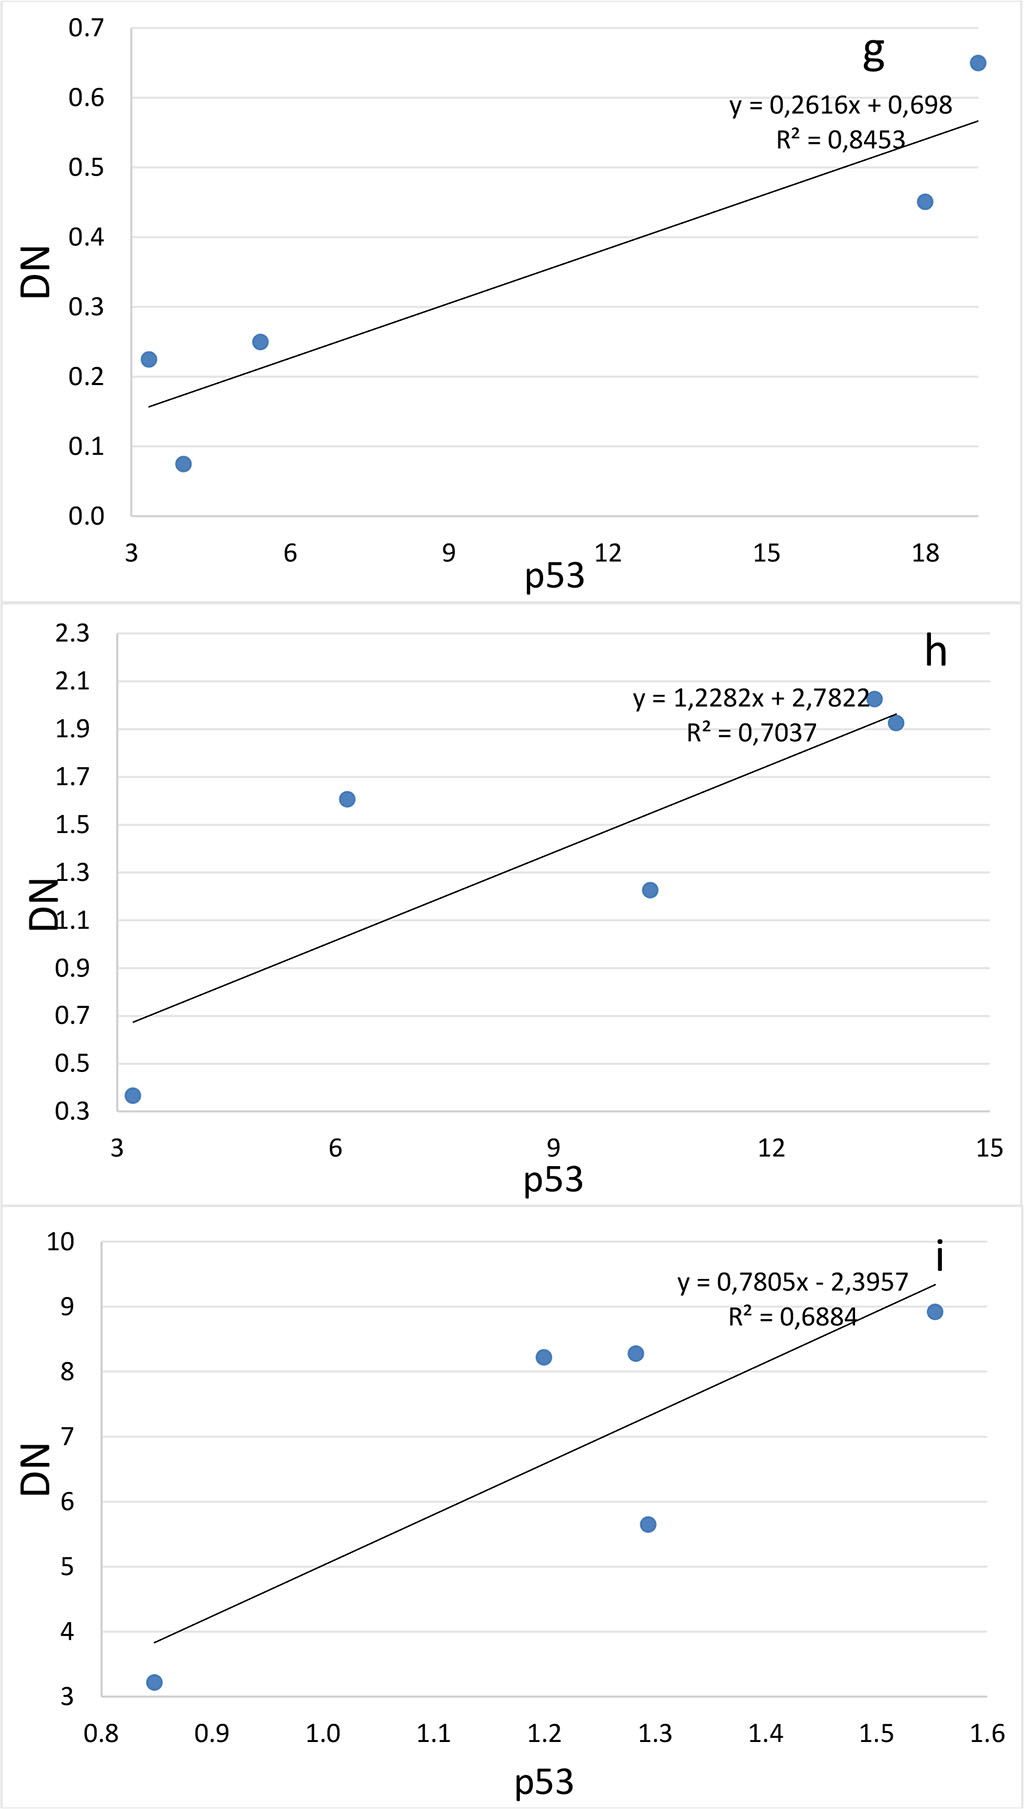 Figure 4. Correlation between the number of dark neurons (DN) and the number of p53-positive neurons (p53) in the hippocampal subfields CA1 (a-c), CA2 (d-f), CA3 (g-i) and DG (j-l) on the 2nd (a, d, g, j), 4th (b, e, h, k) and 6th (c, f, i, l) days after the septoplasty simulation.